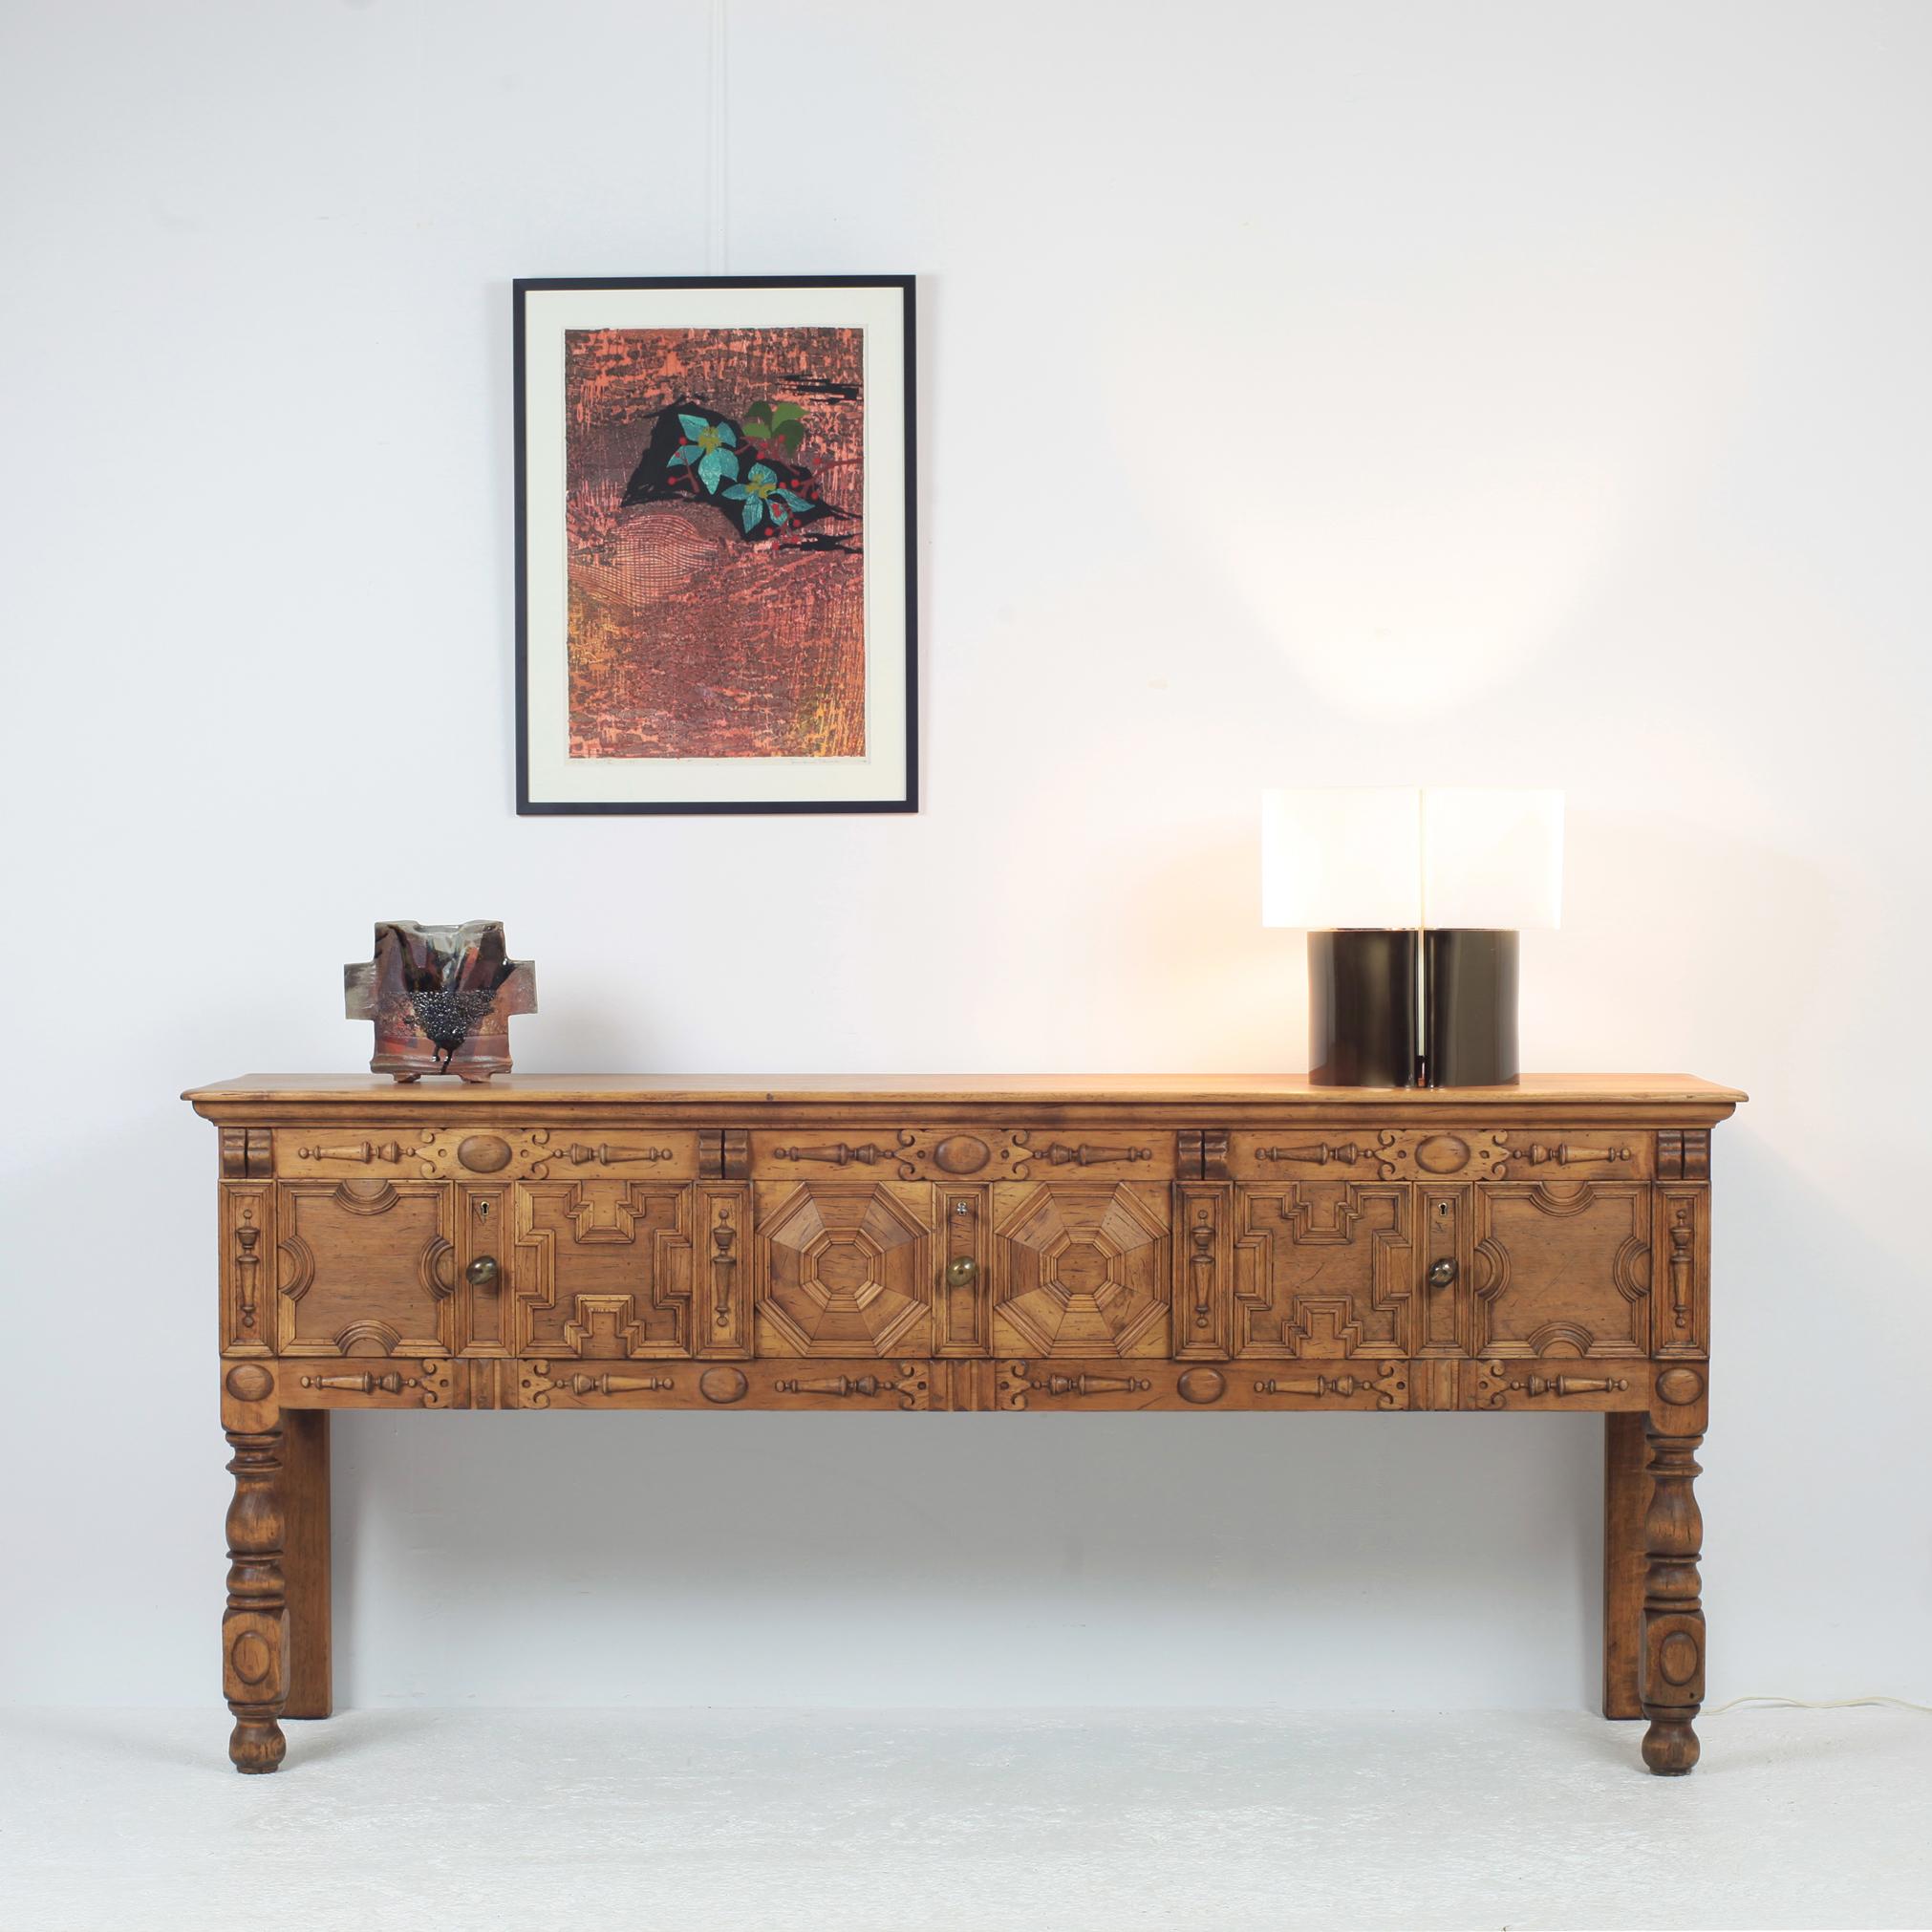 Nordiska Kompaniet credenza / sideboard / console table dated 1930.
Solid wood with sculpted decor.
Beautiful patina.
Manufacturer label on the back.